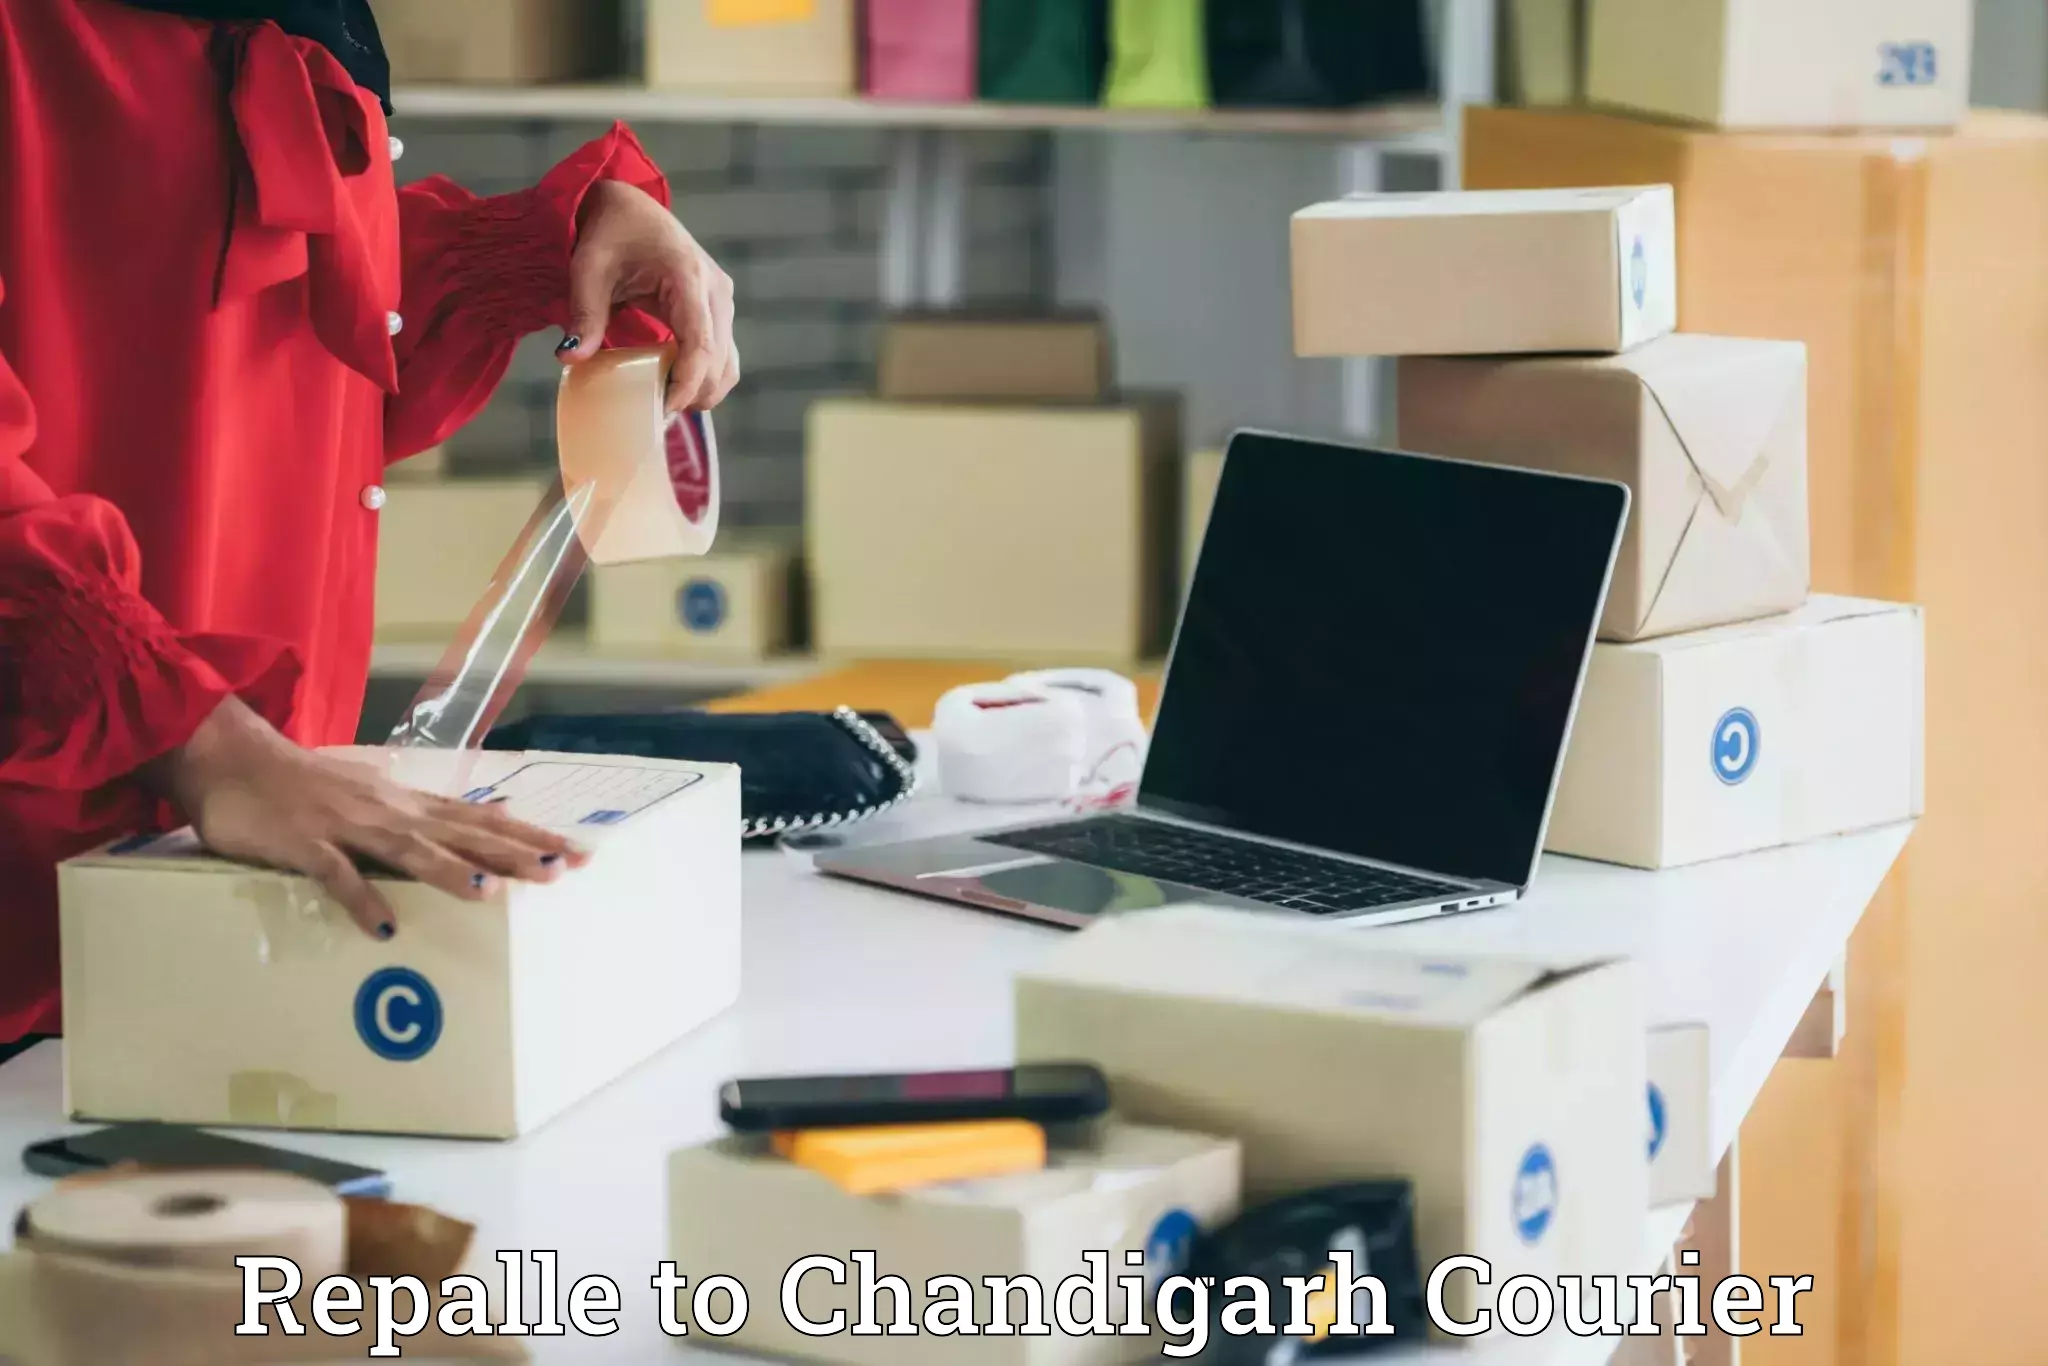 Luggage delivery logistics Repalle to Chandigarh